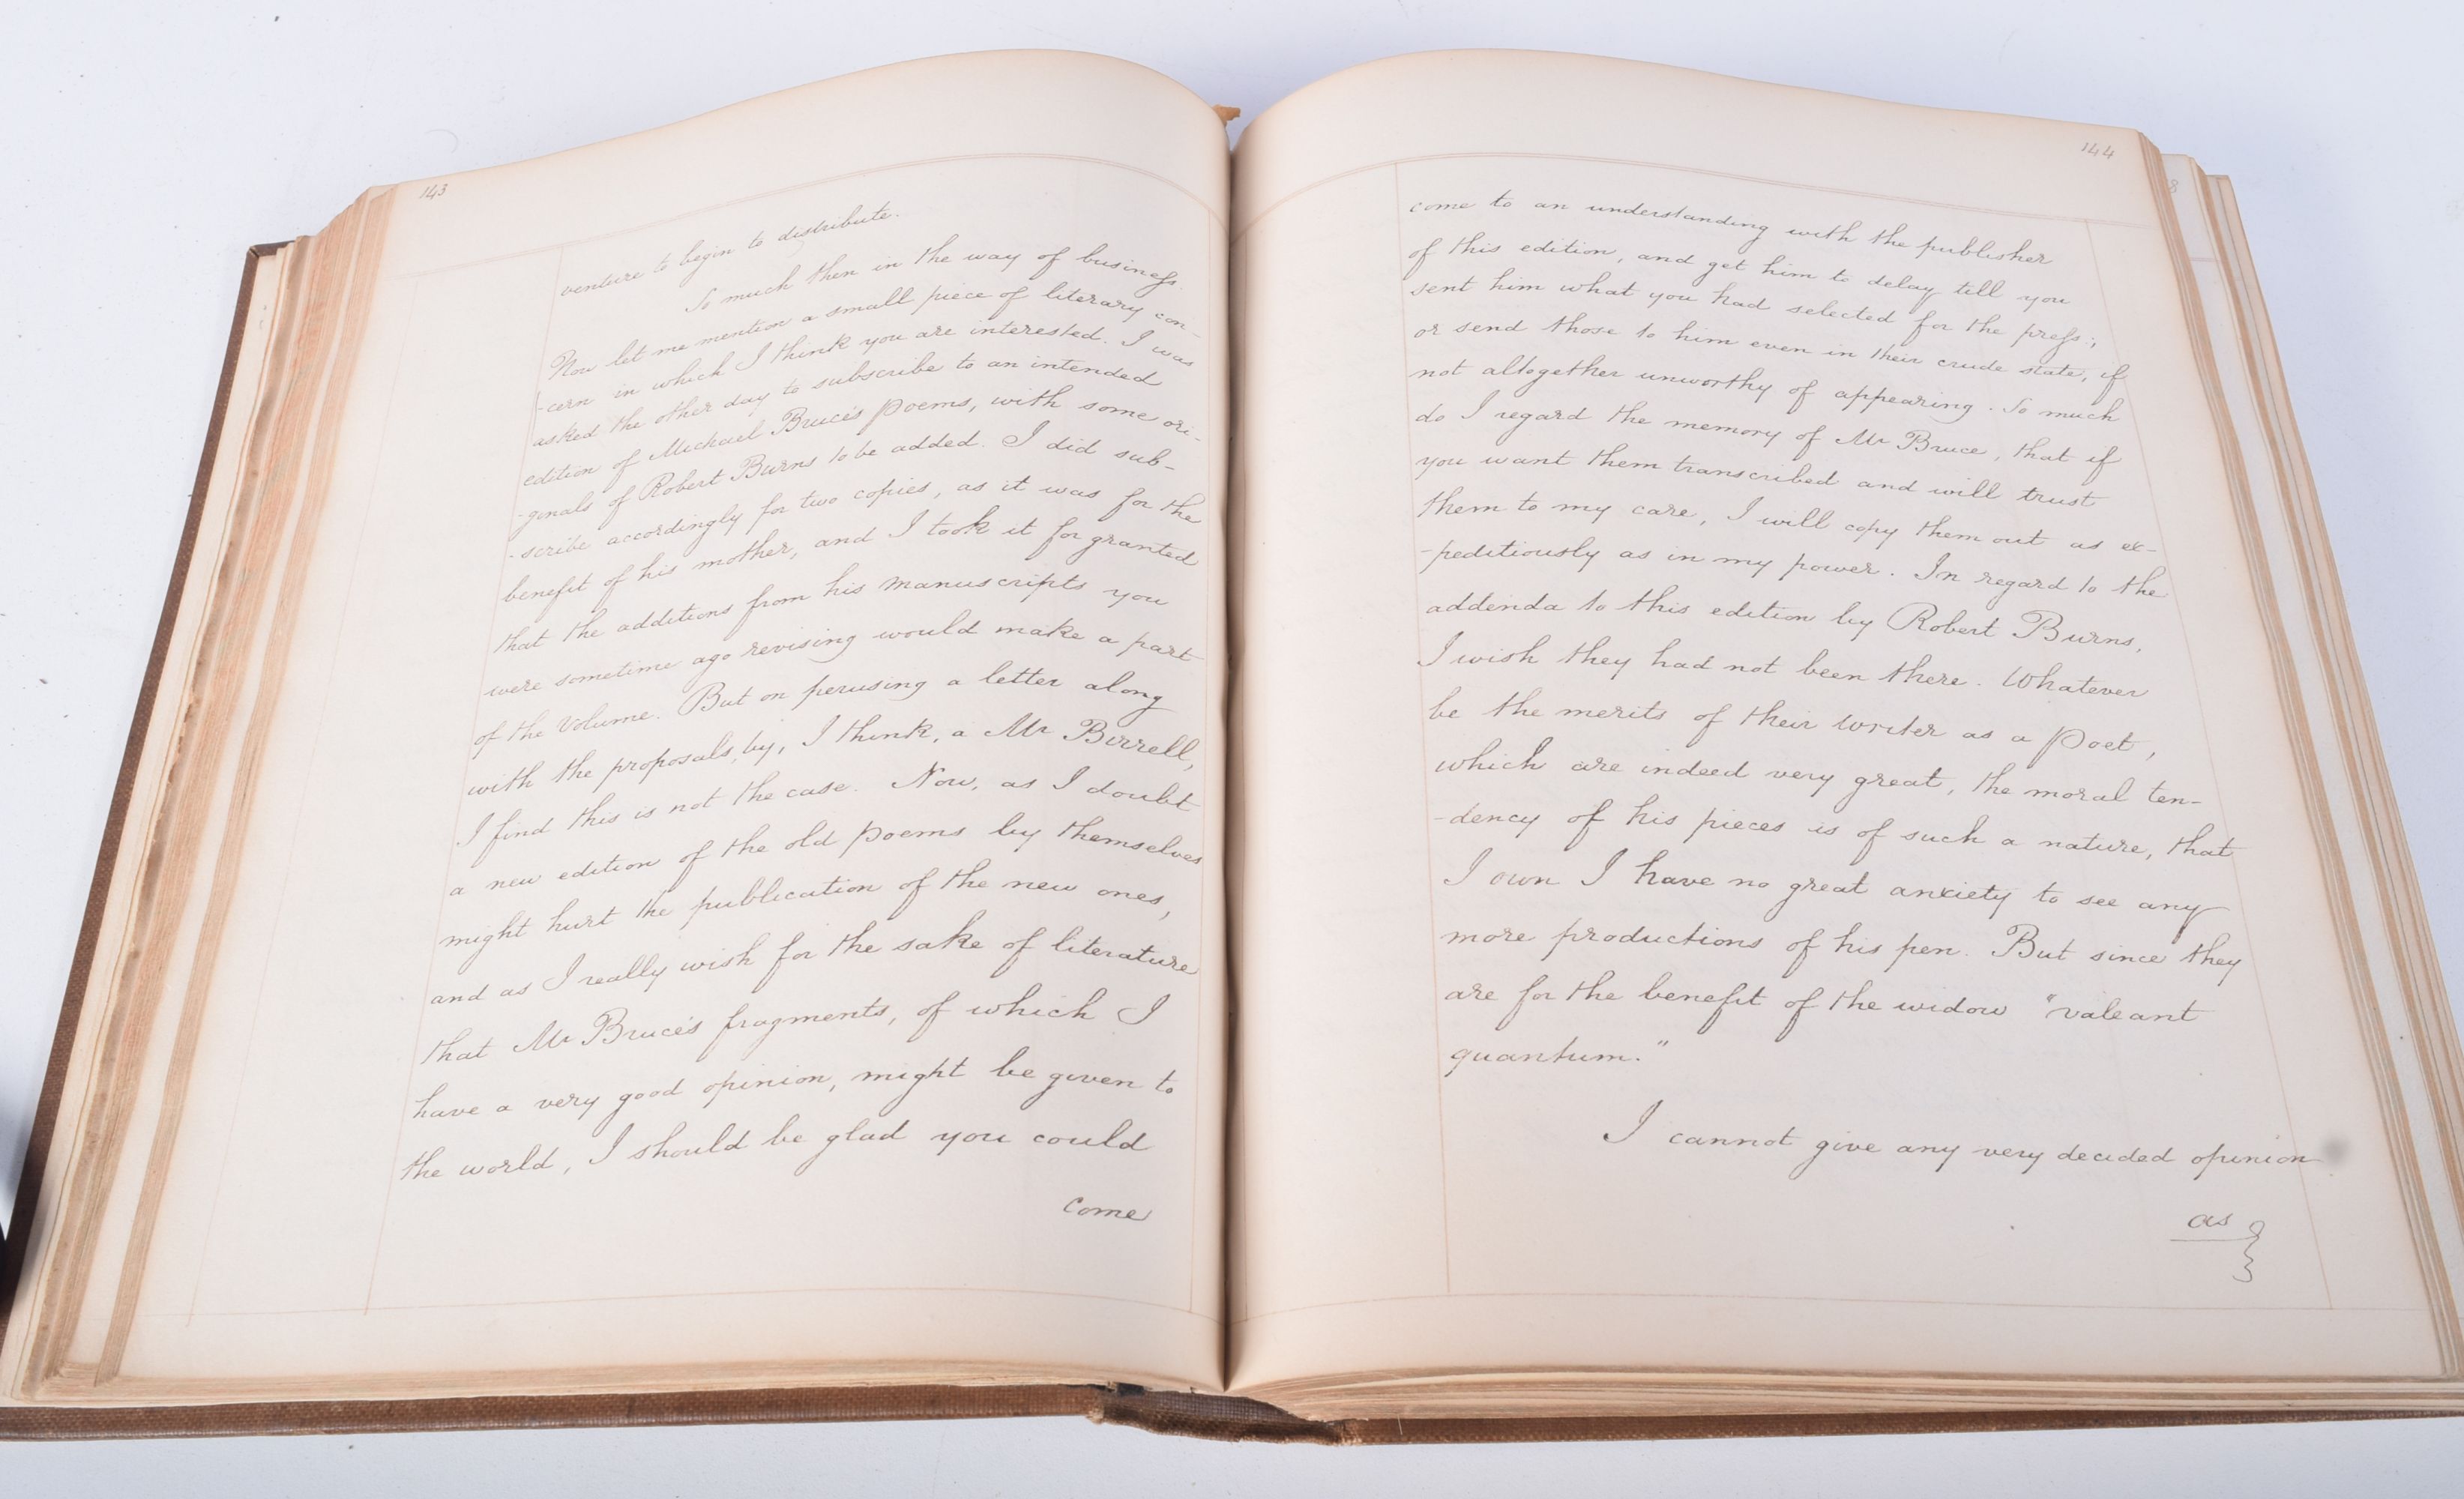 A book containing the hand written memoirs of James Bonar (1757-1821)who served as the Solicitor of - Image 3 of 3